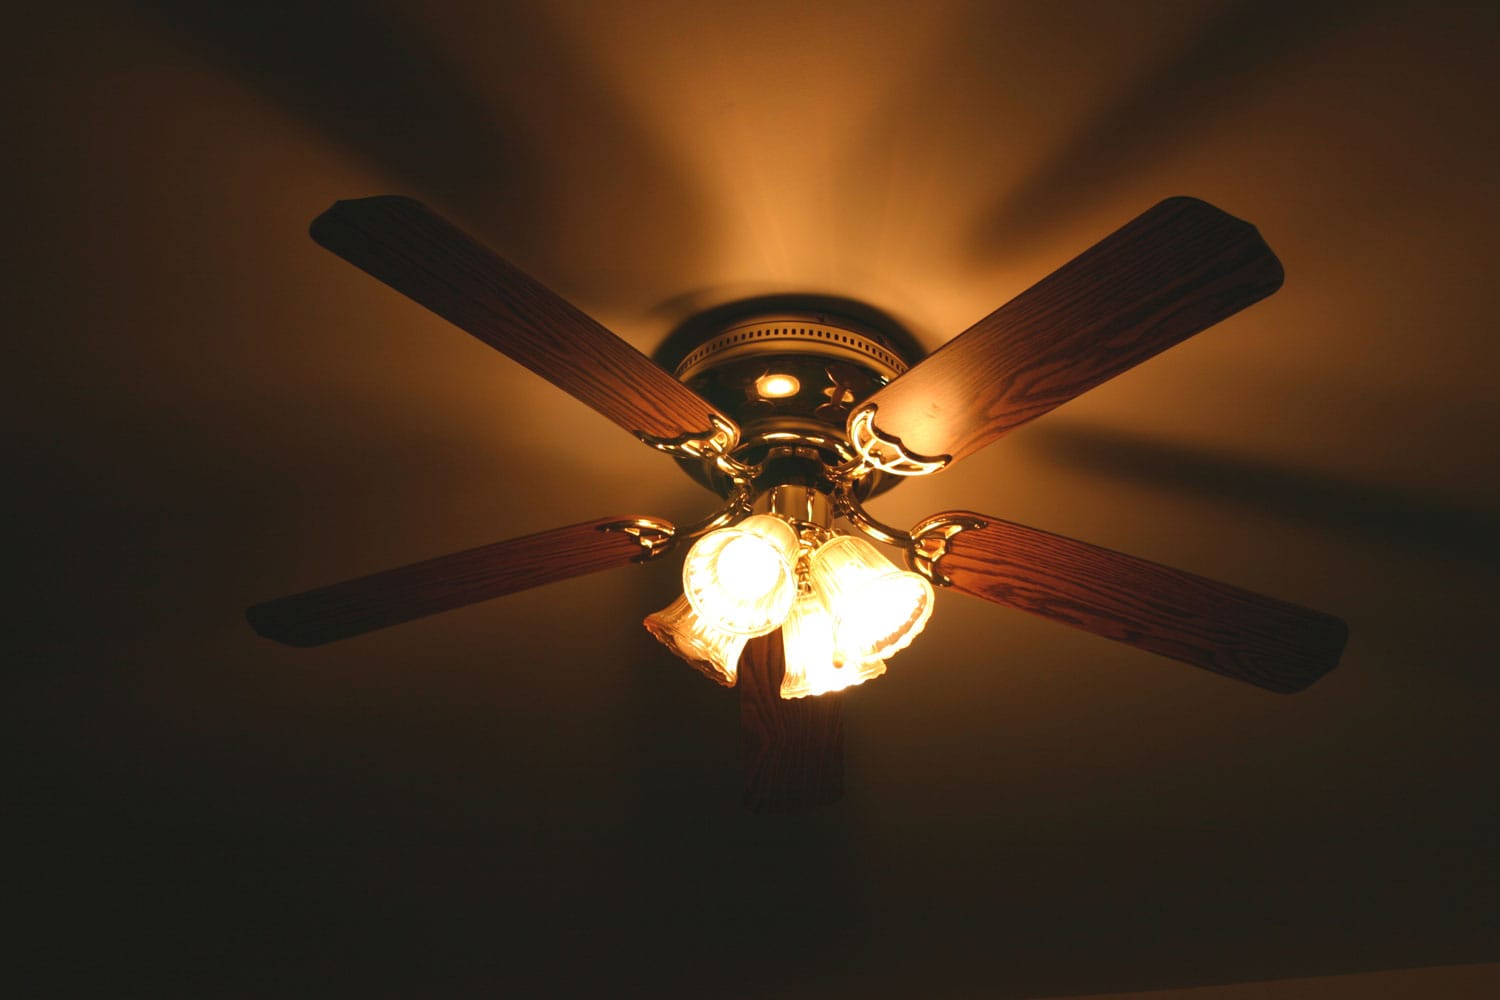 A wooden blade ceiling fan with lights turned on